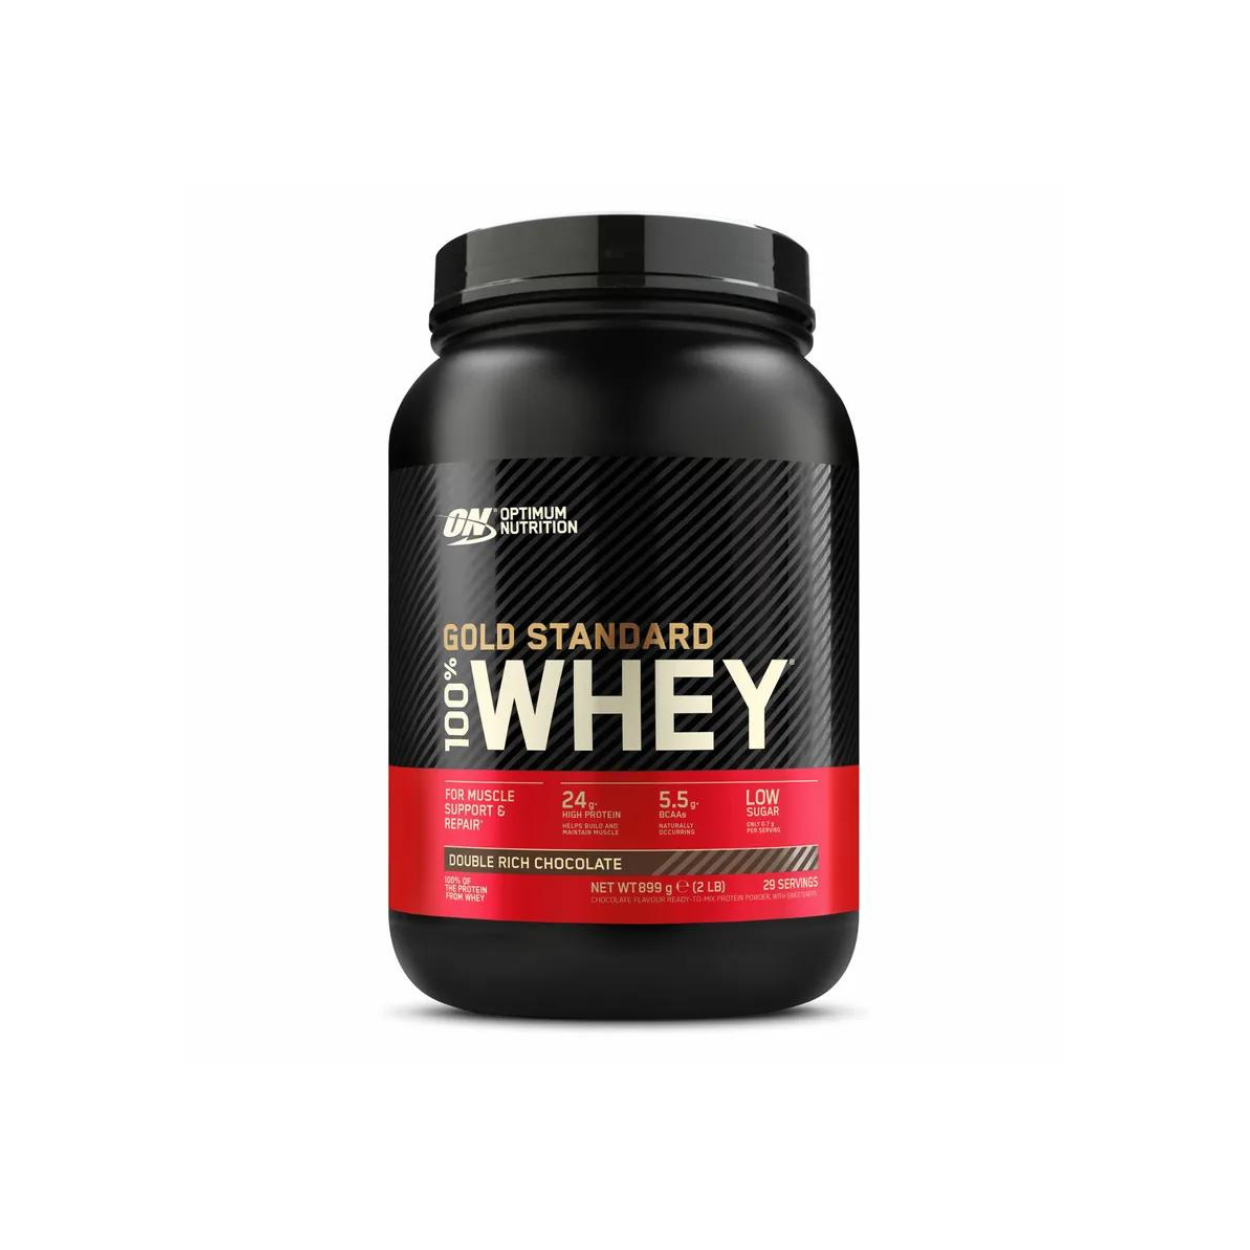 Optimum Nutrition Gold Standard Whey Double Rich Chocolate